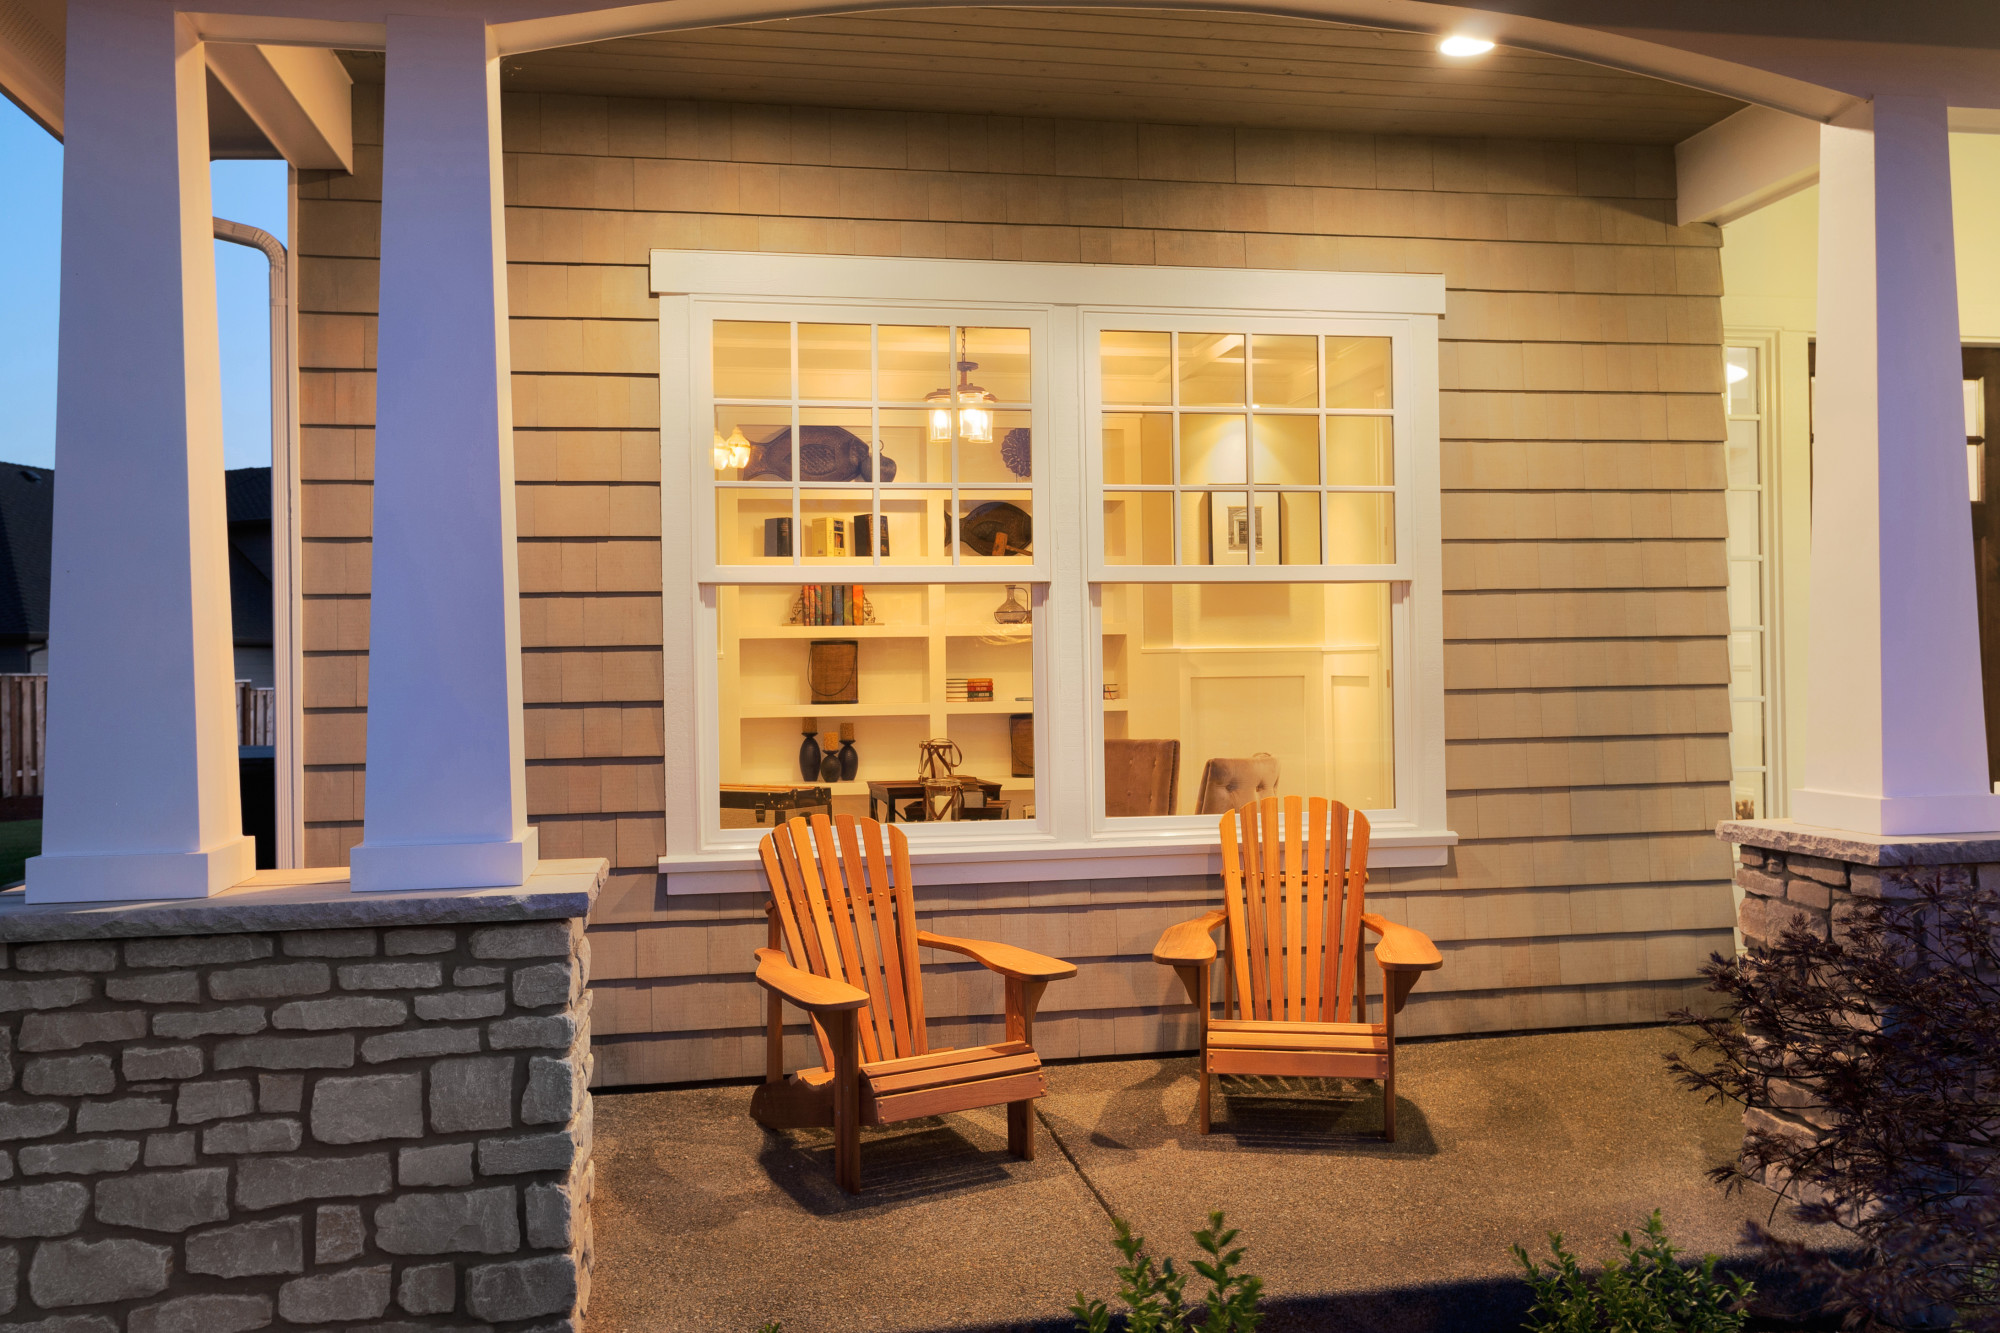 5 Reasons Why Vinyl Home Siding is a Great Choice